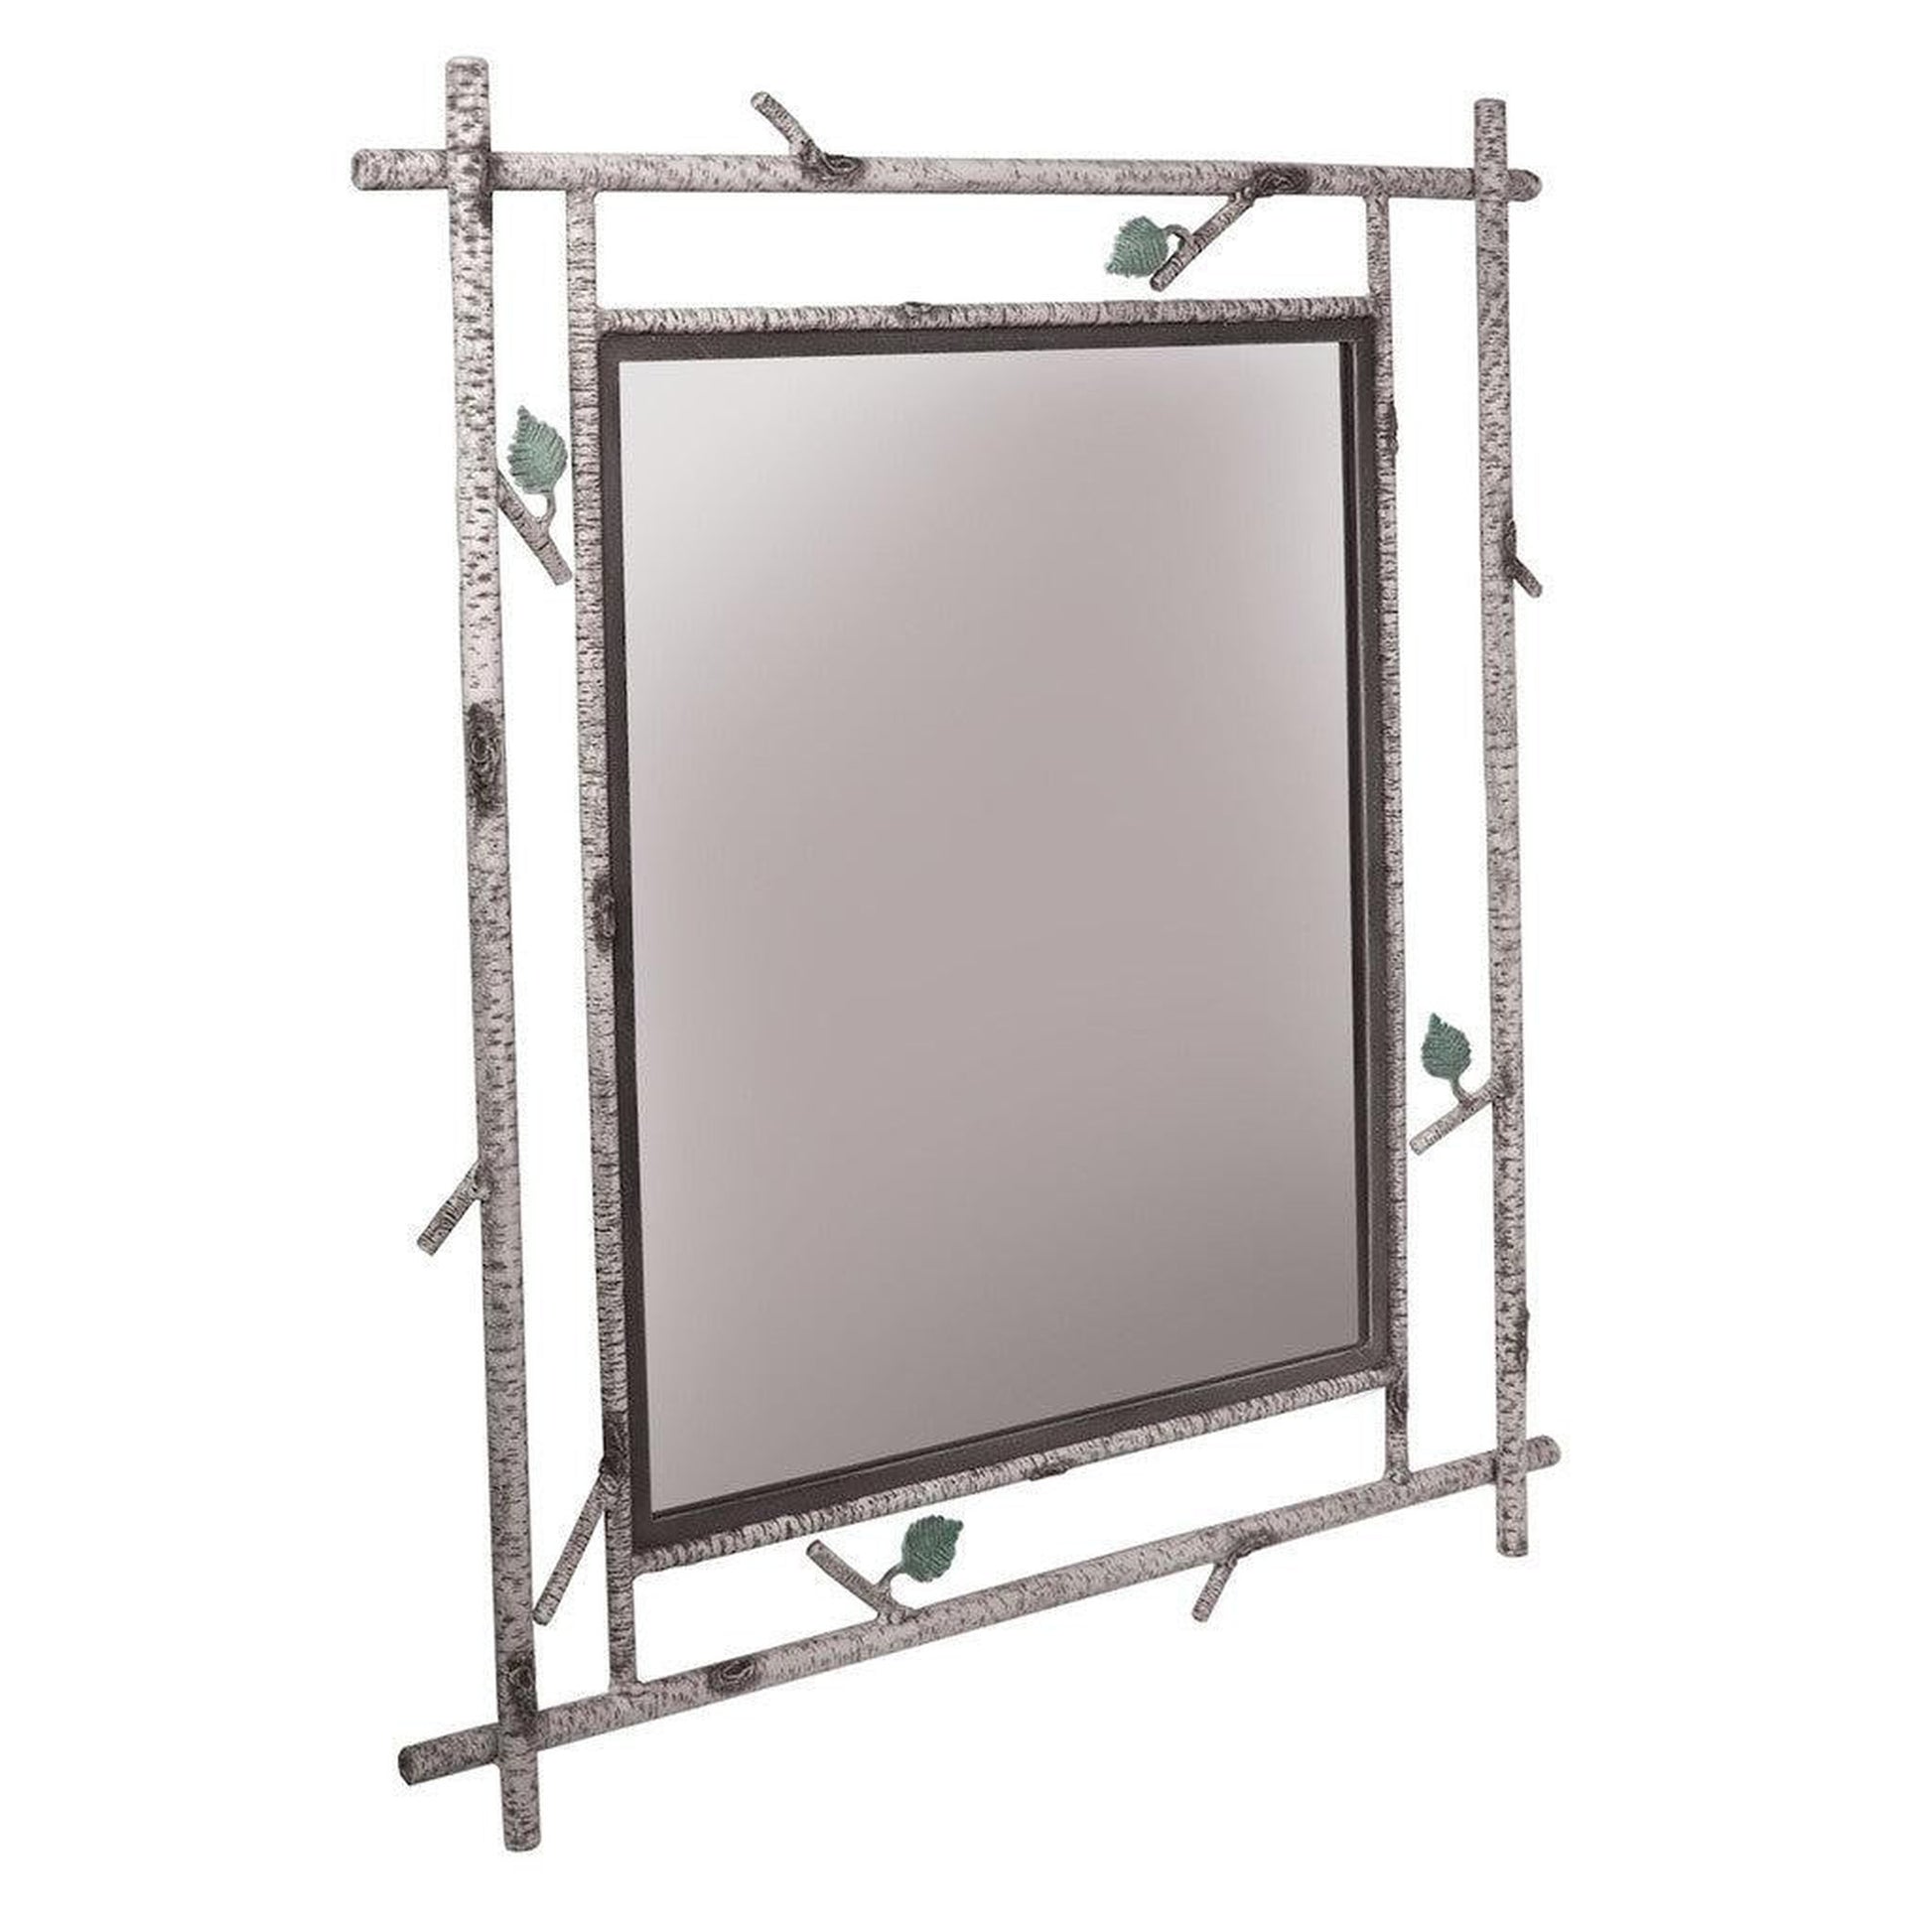 Stone County Ironworks Whisper Creek 30" x 34" Small Hand Rubbed Brass Iron Wall Mirror With Copper Iron Accent